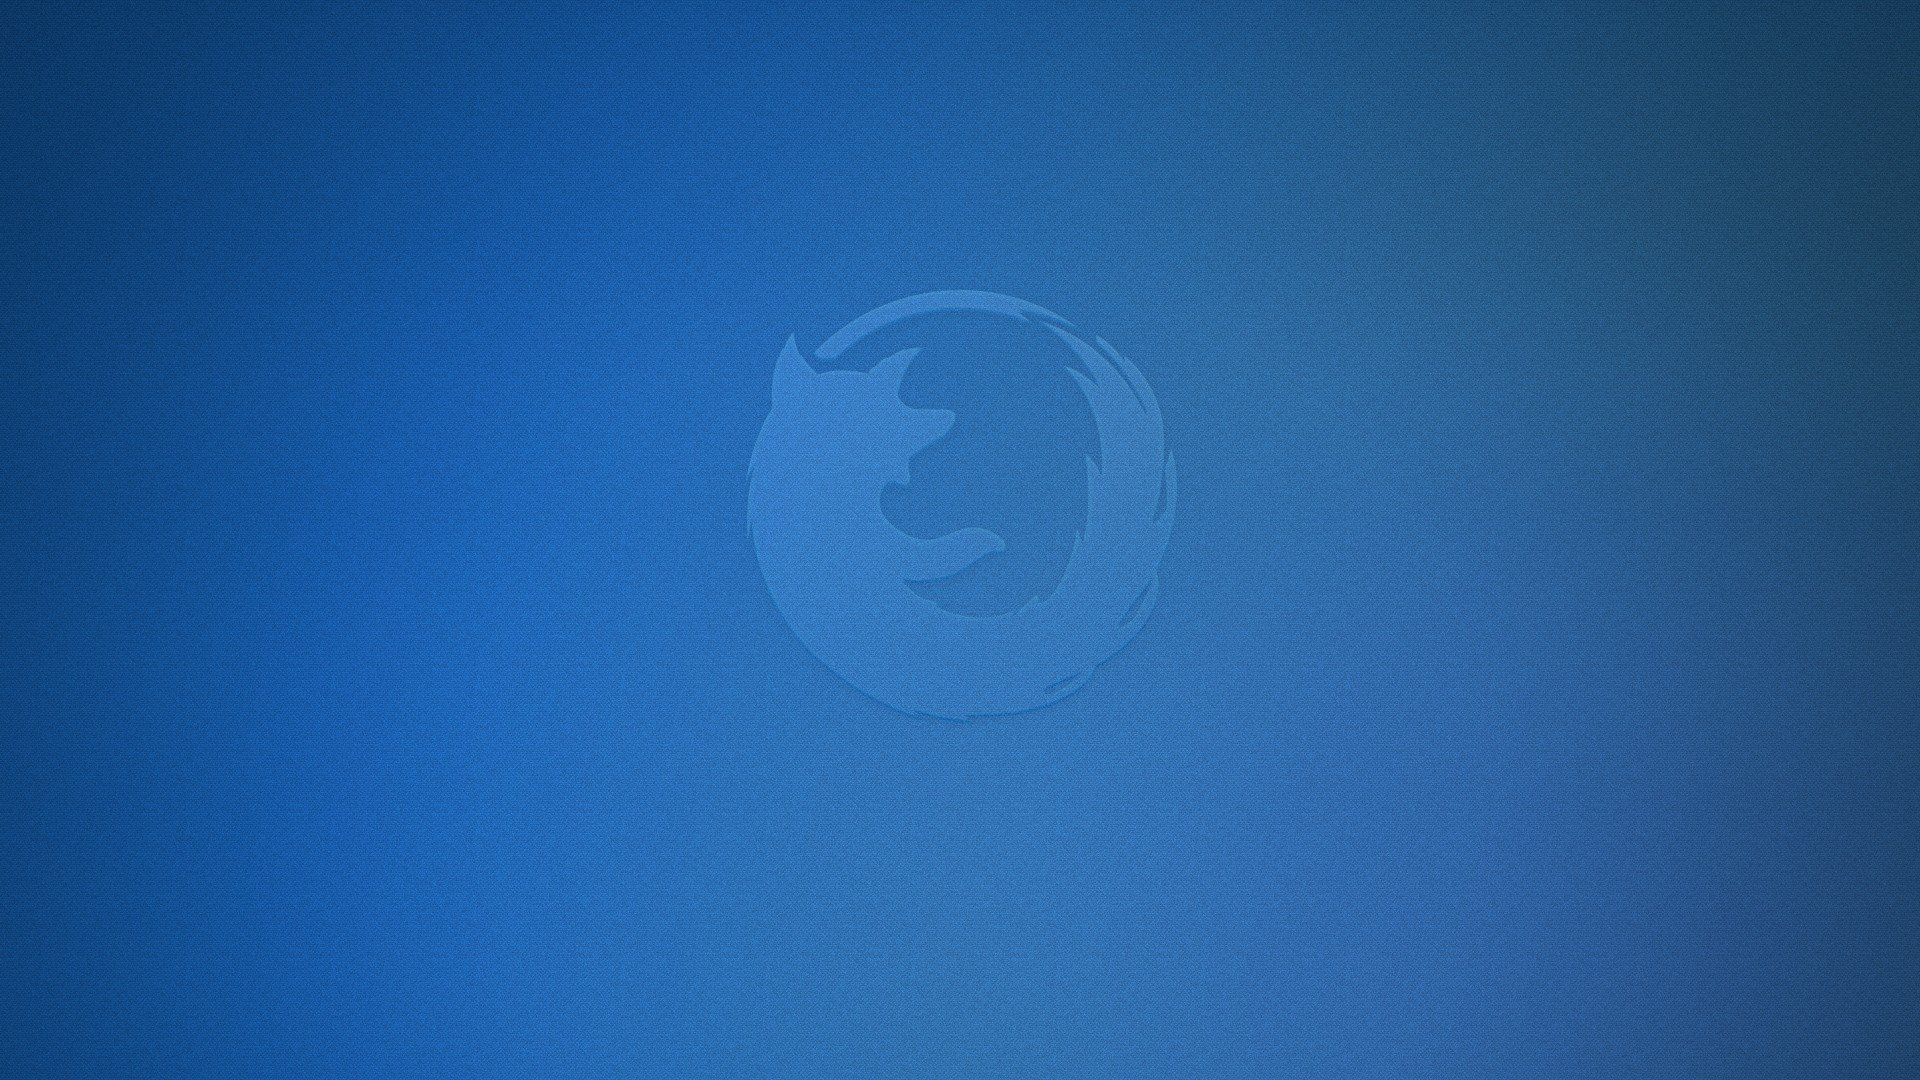 How to install an extension in Mozilla Firefox